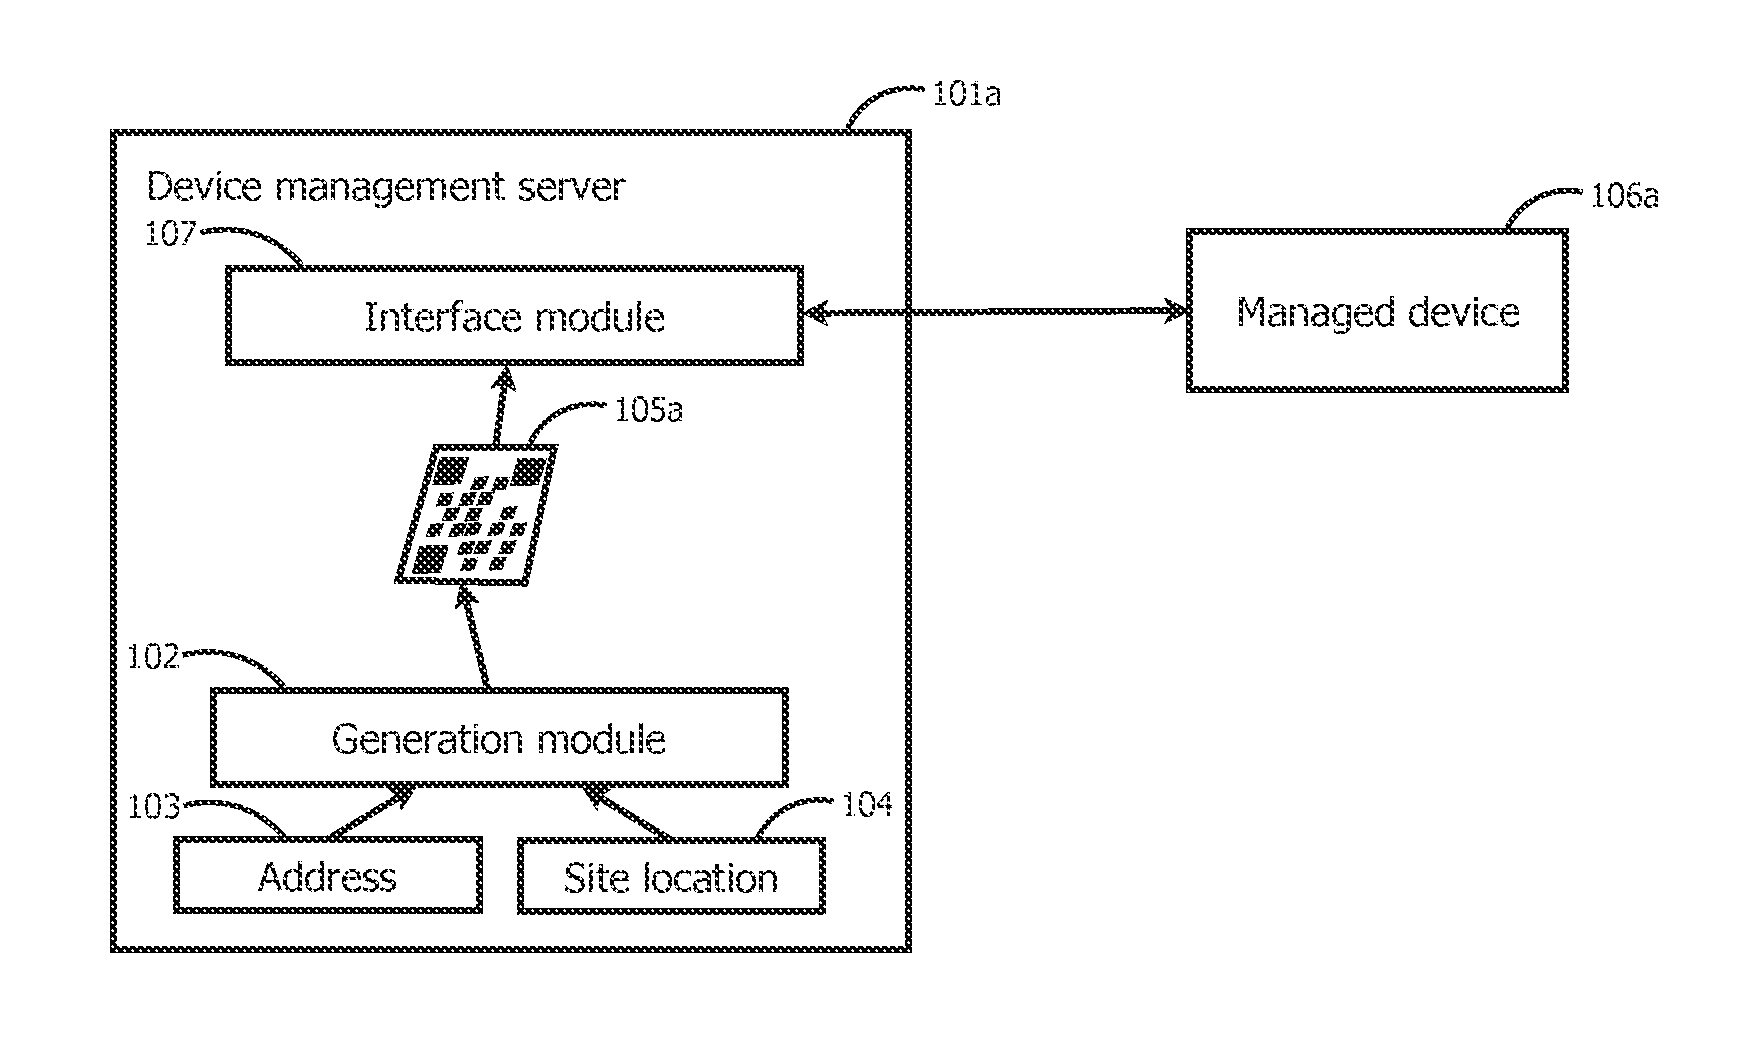 Systems and methods for configuring a managed device using an image